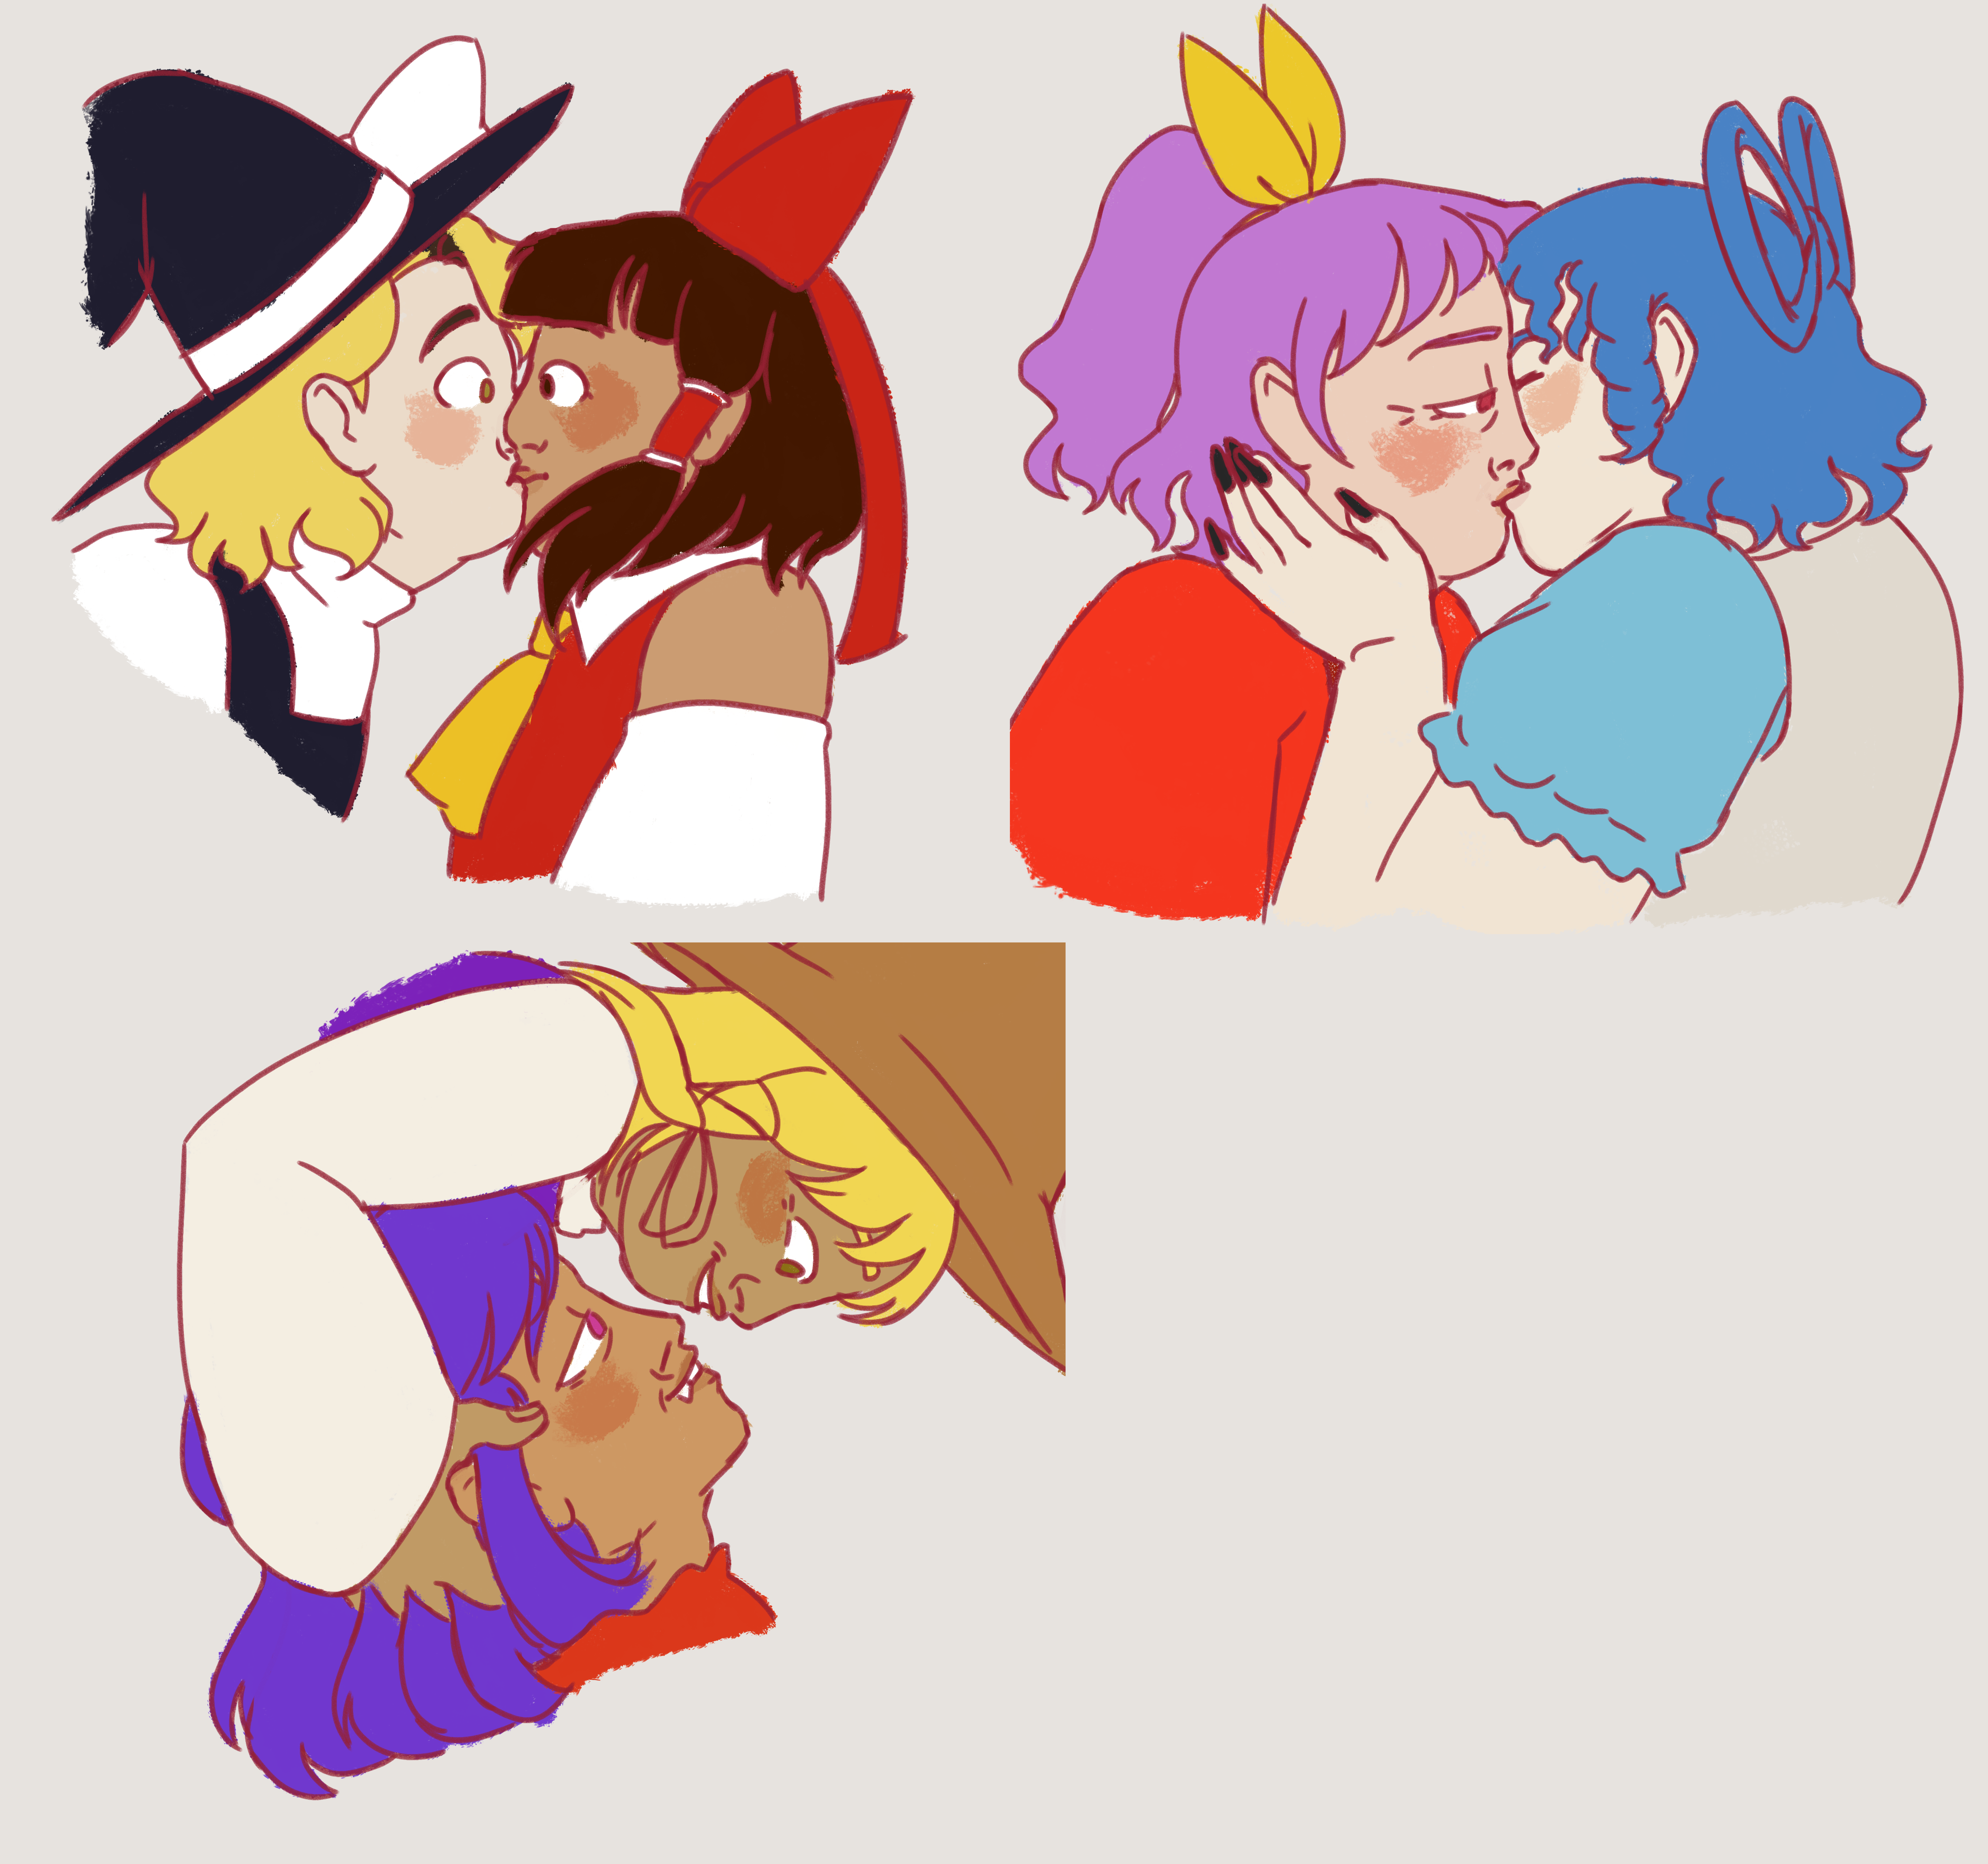 three drawings of pairs of Touhou characters: Marisa and Reimu are kissing and look startled by this fact; Sannyo and Seiga are kissing, pressed close to each other; Suwako is holding Kanako's head from above, upside down in Kanako's perspective